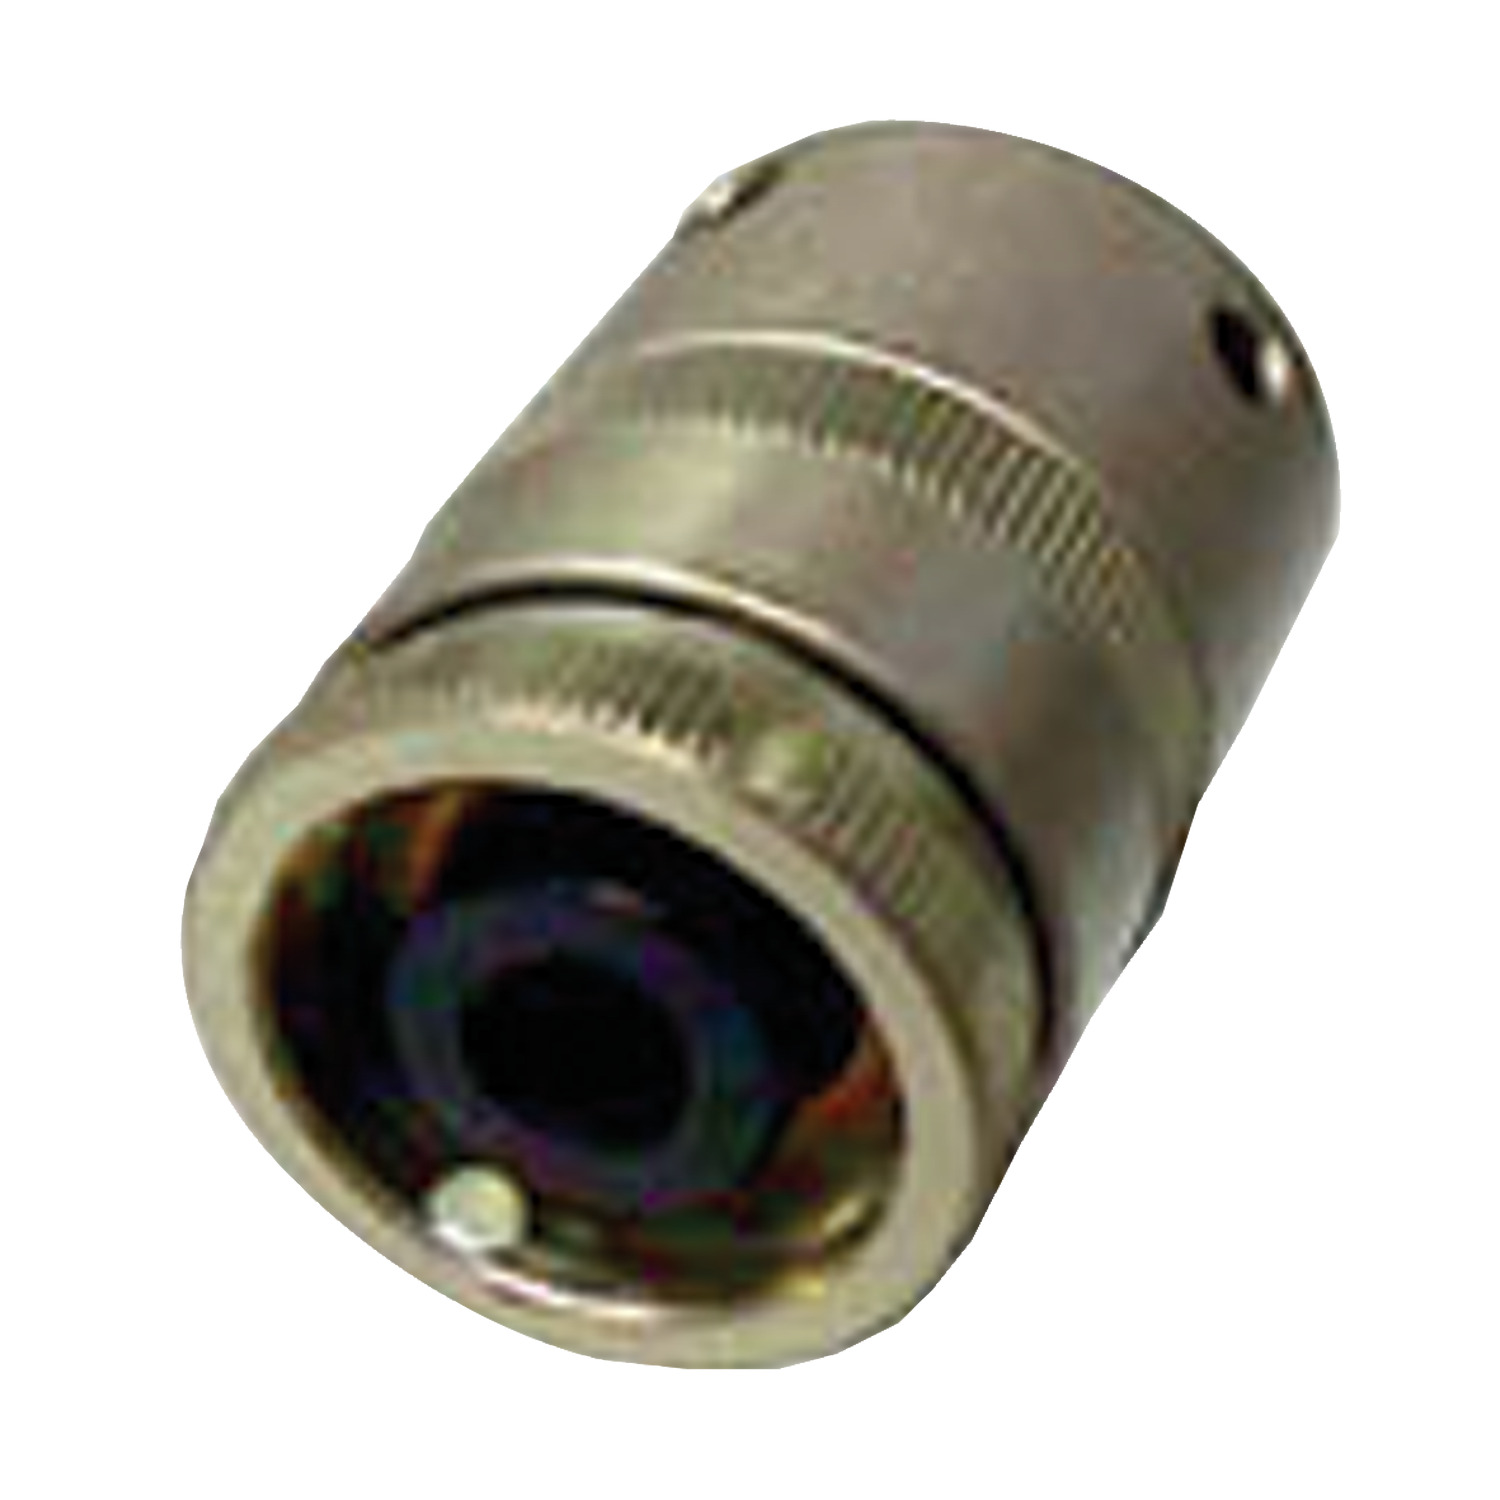 Product R3080, Slip Couplings Adjustable 2,4 to 130Ncm / 